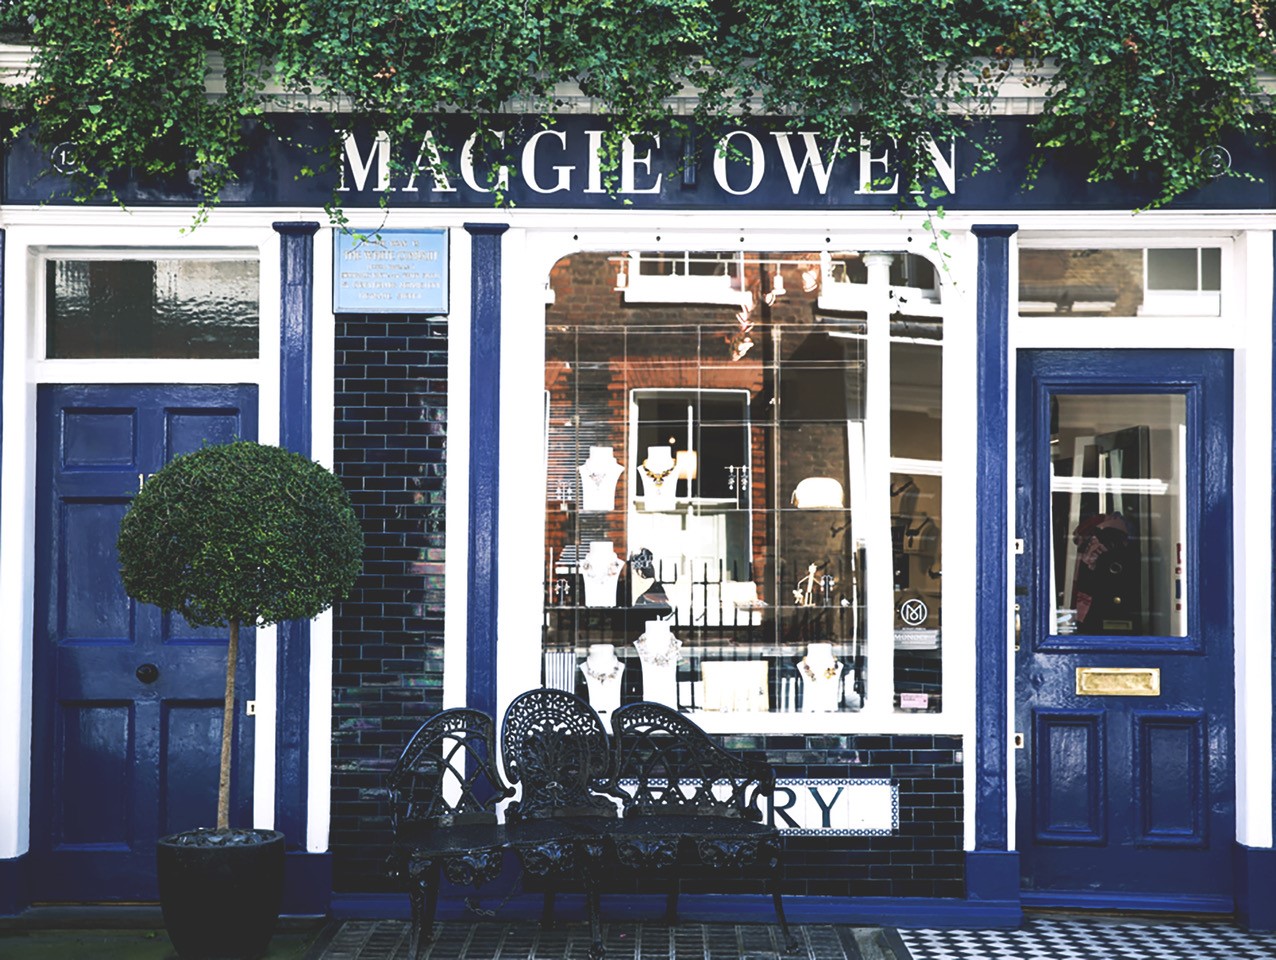 Maggine Owen shop exterior with a jewellery window display 